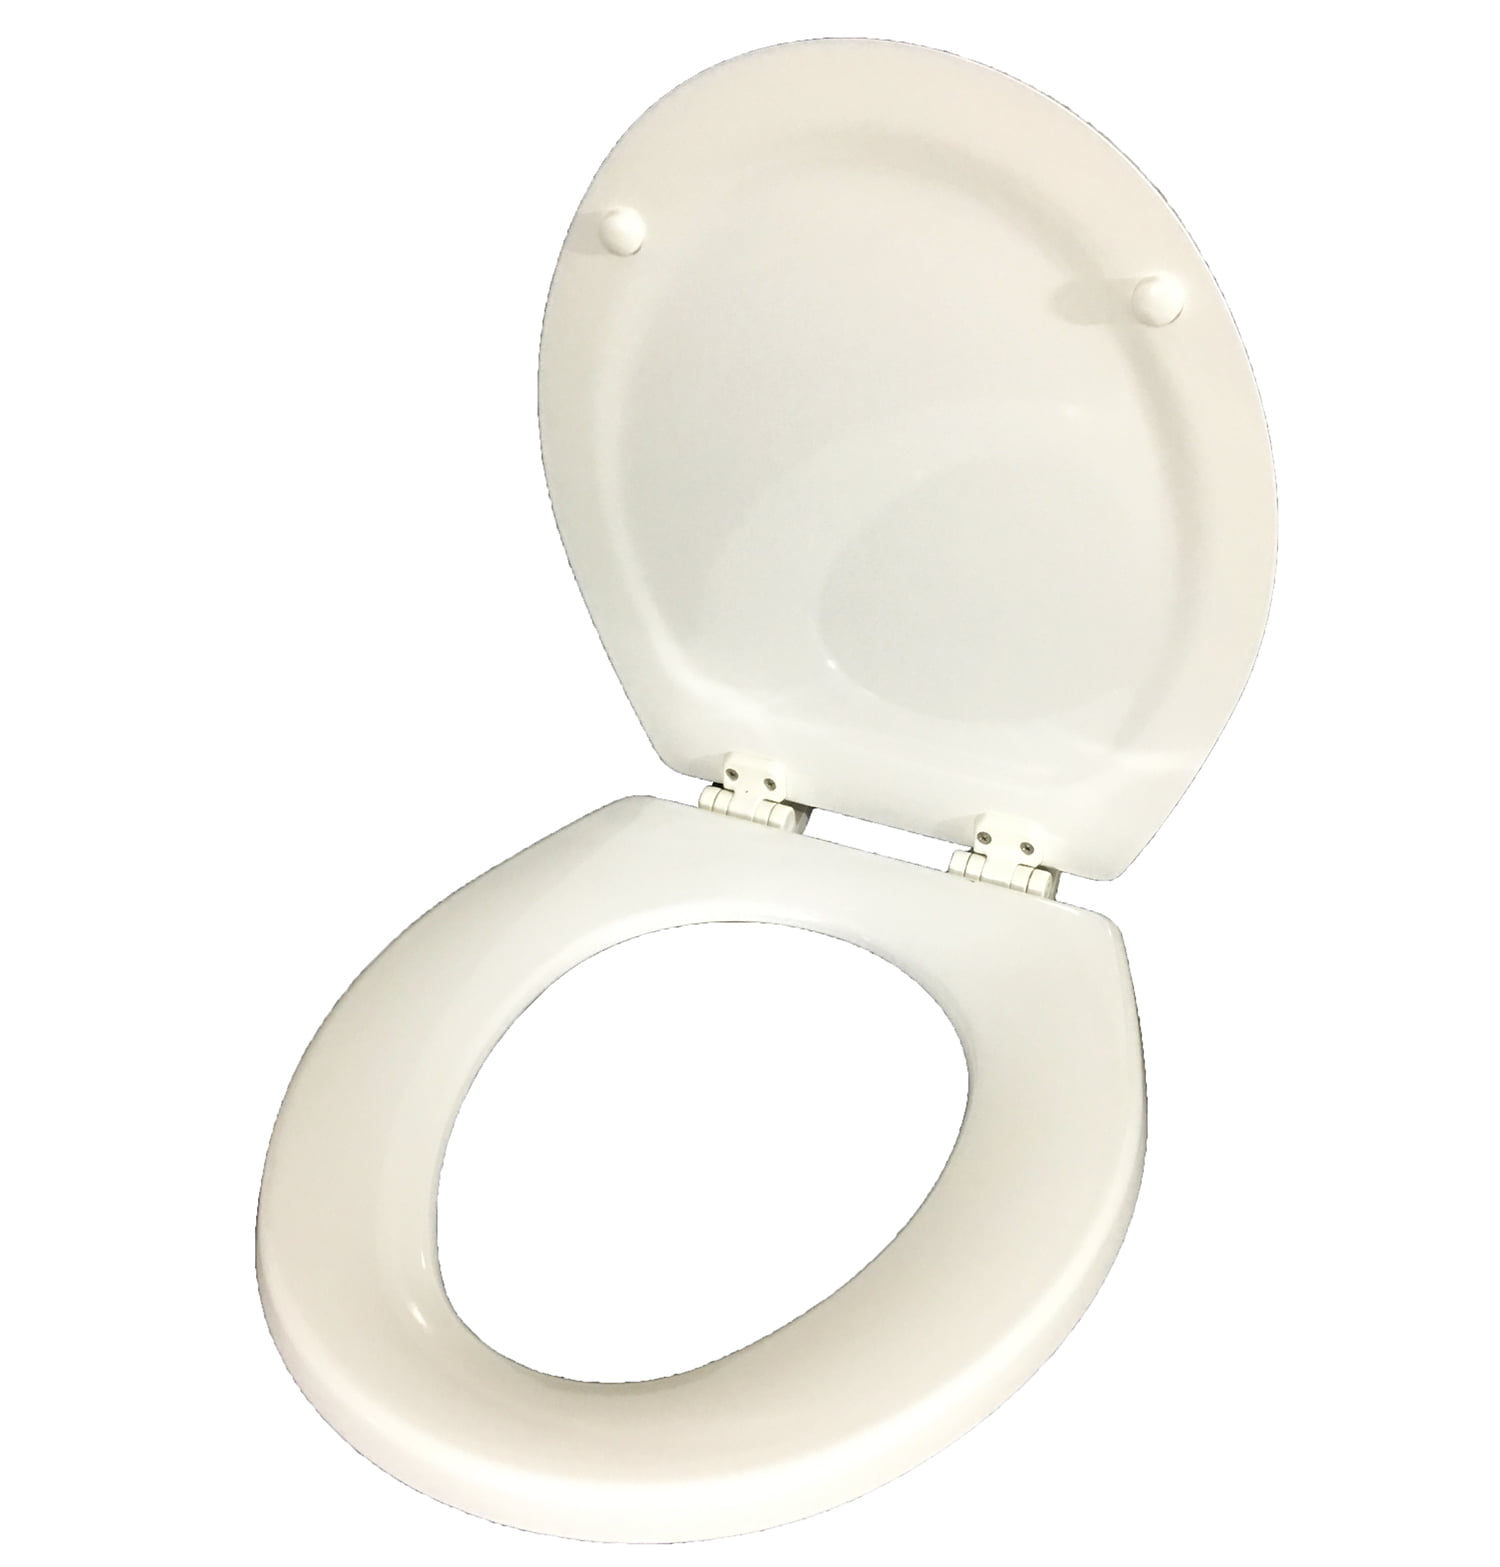 travel trailer toilet seat replacement